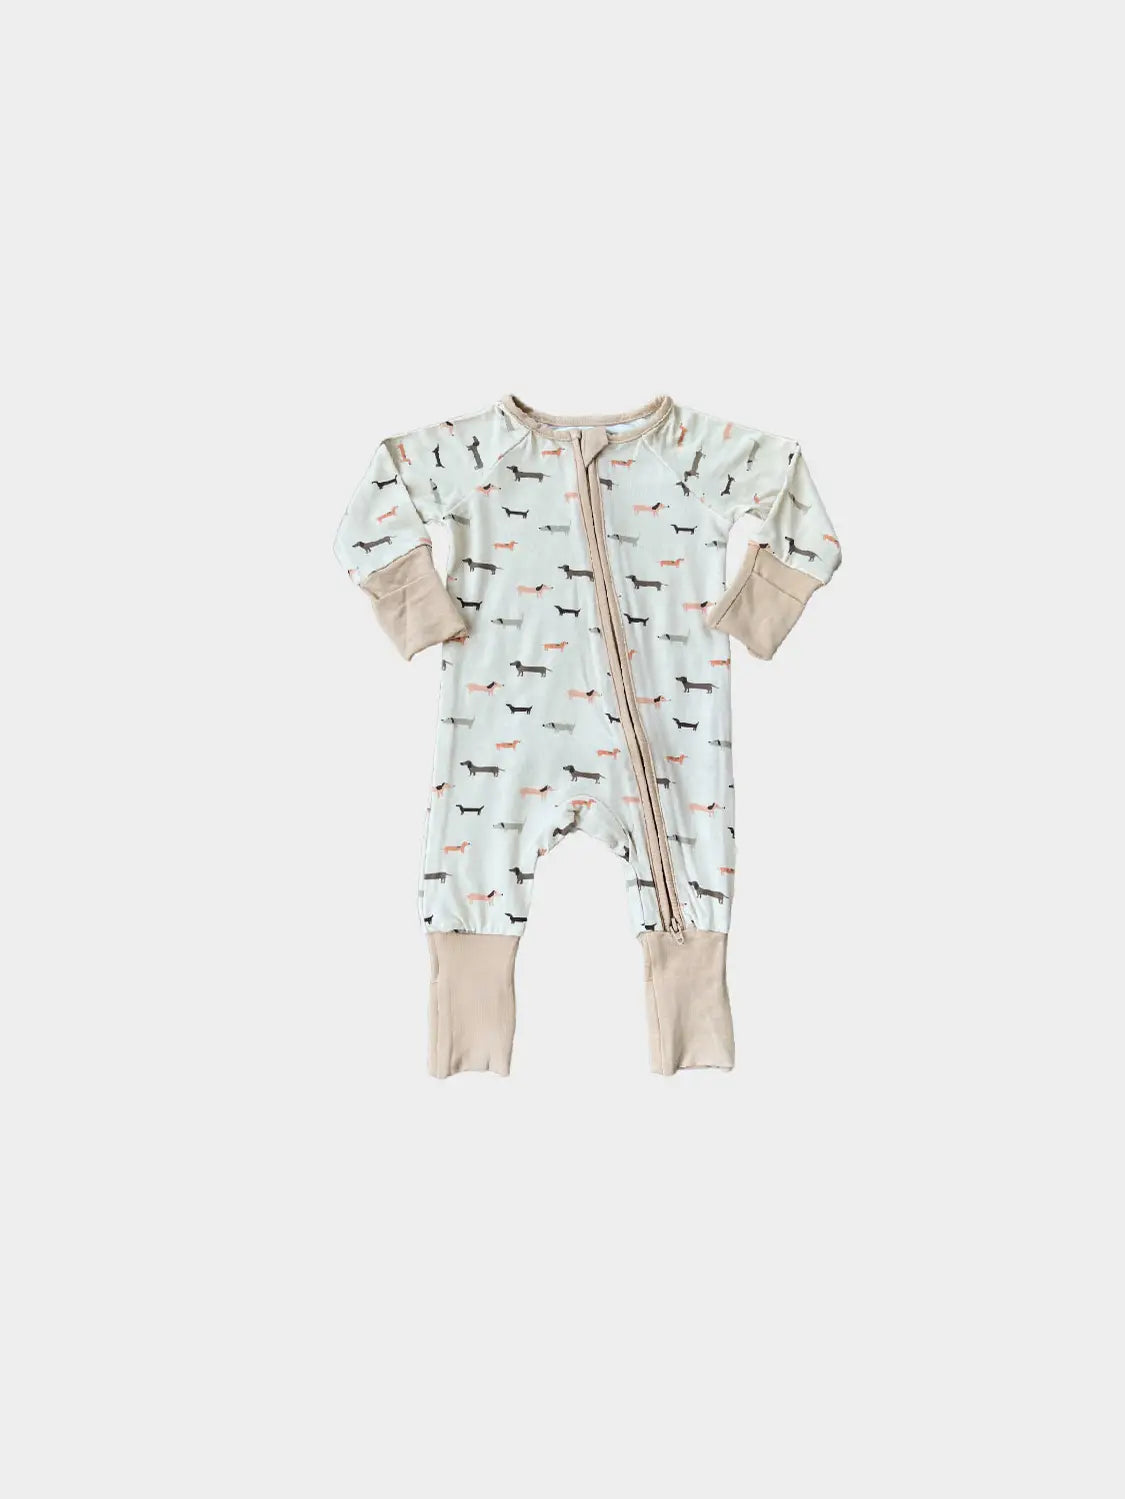 Babysprouts infant footless romper